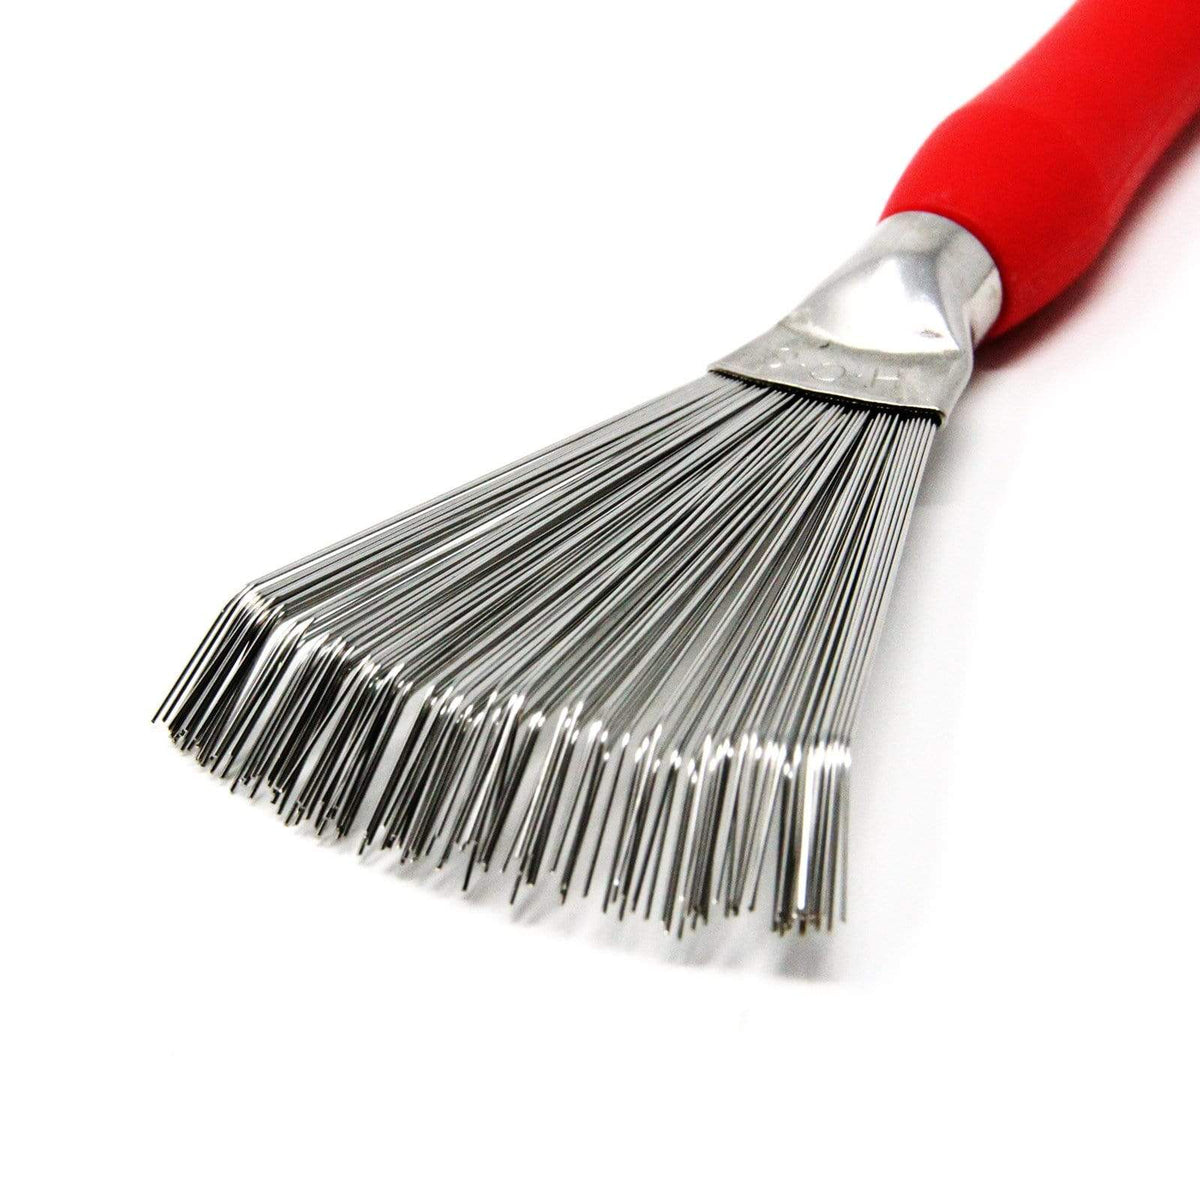 Stainless Steel Cleaning Brush Scrubber